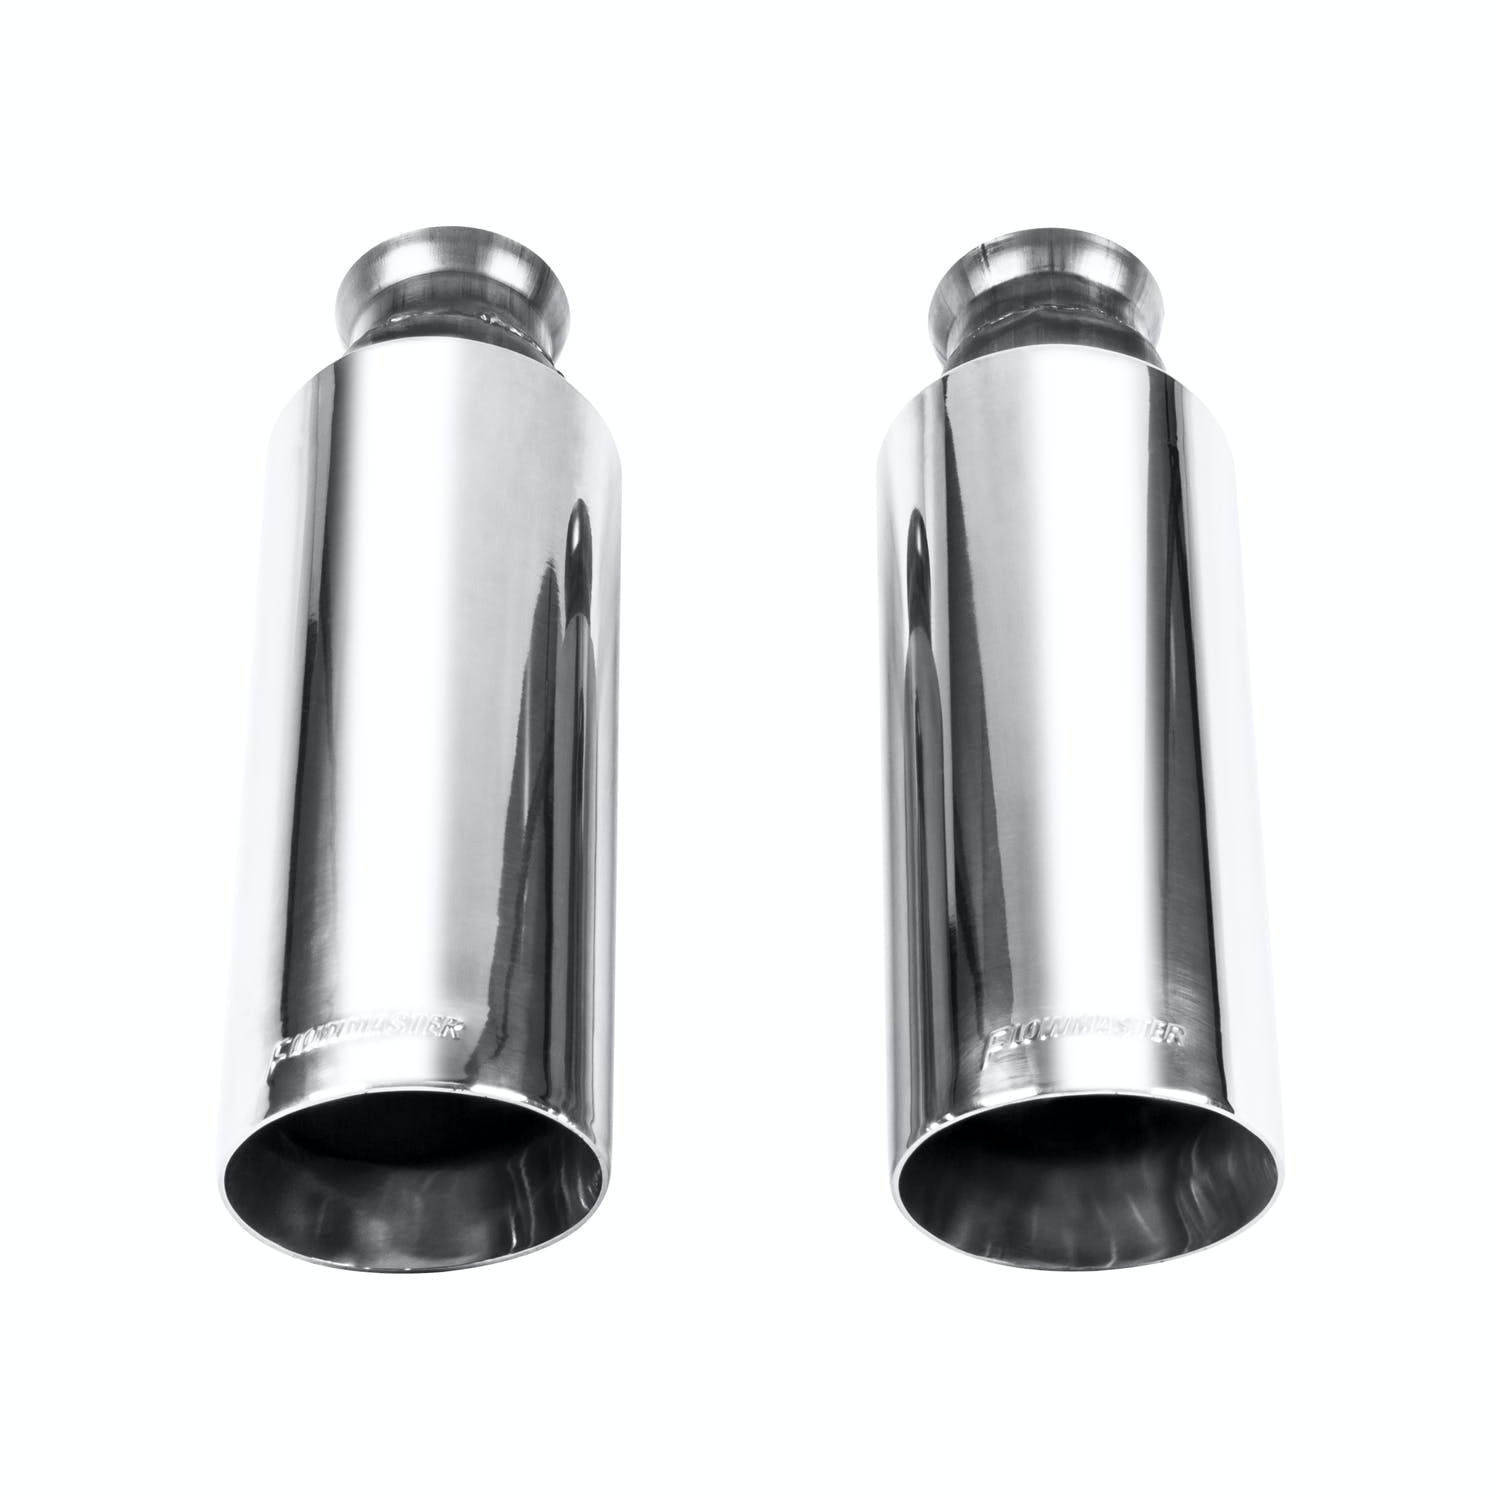 Flowmaster 15356 09-18 RAM TRUCK TIP, CLAMP ON, POLISHED,